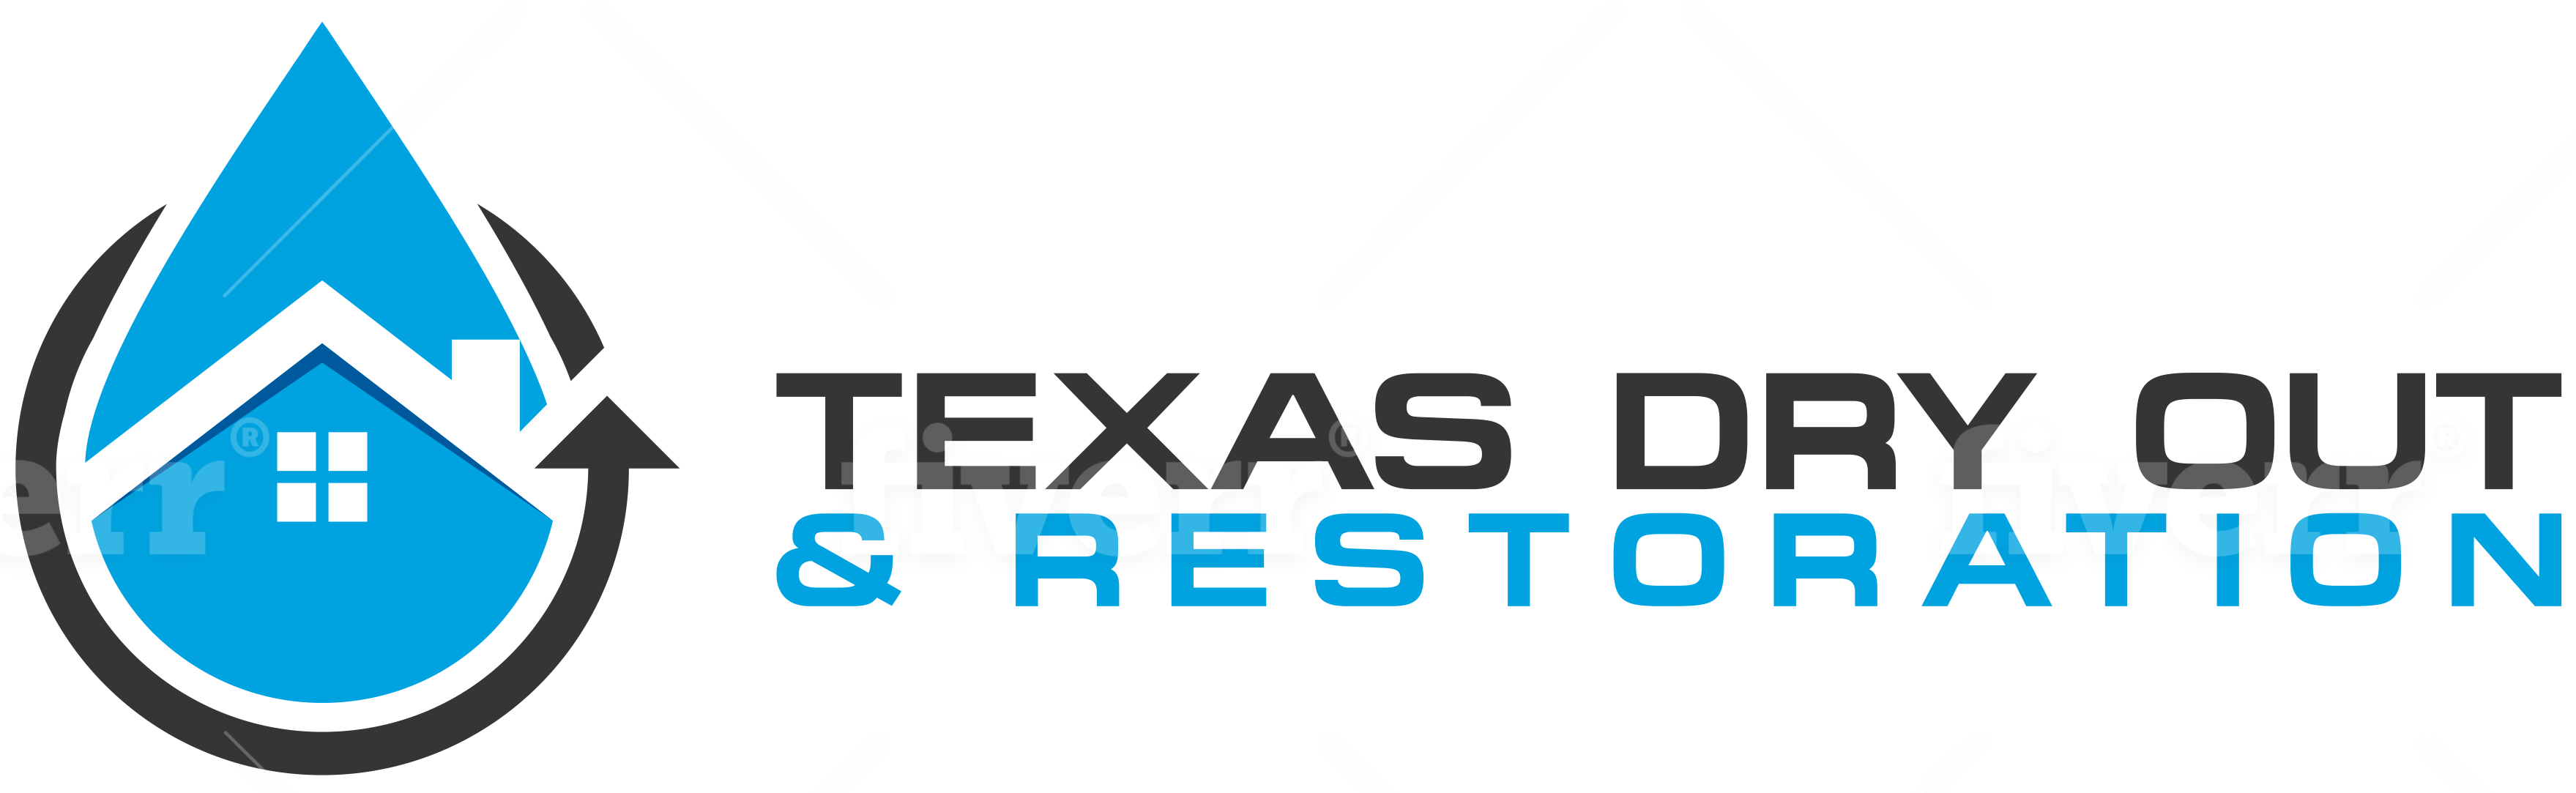 Texas Dry Out & Restoration